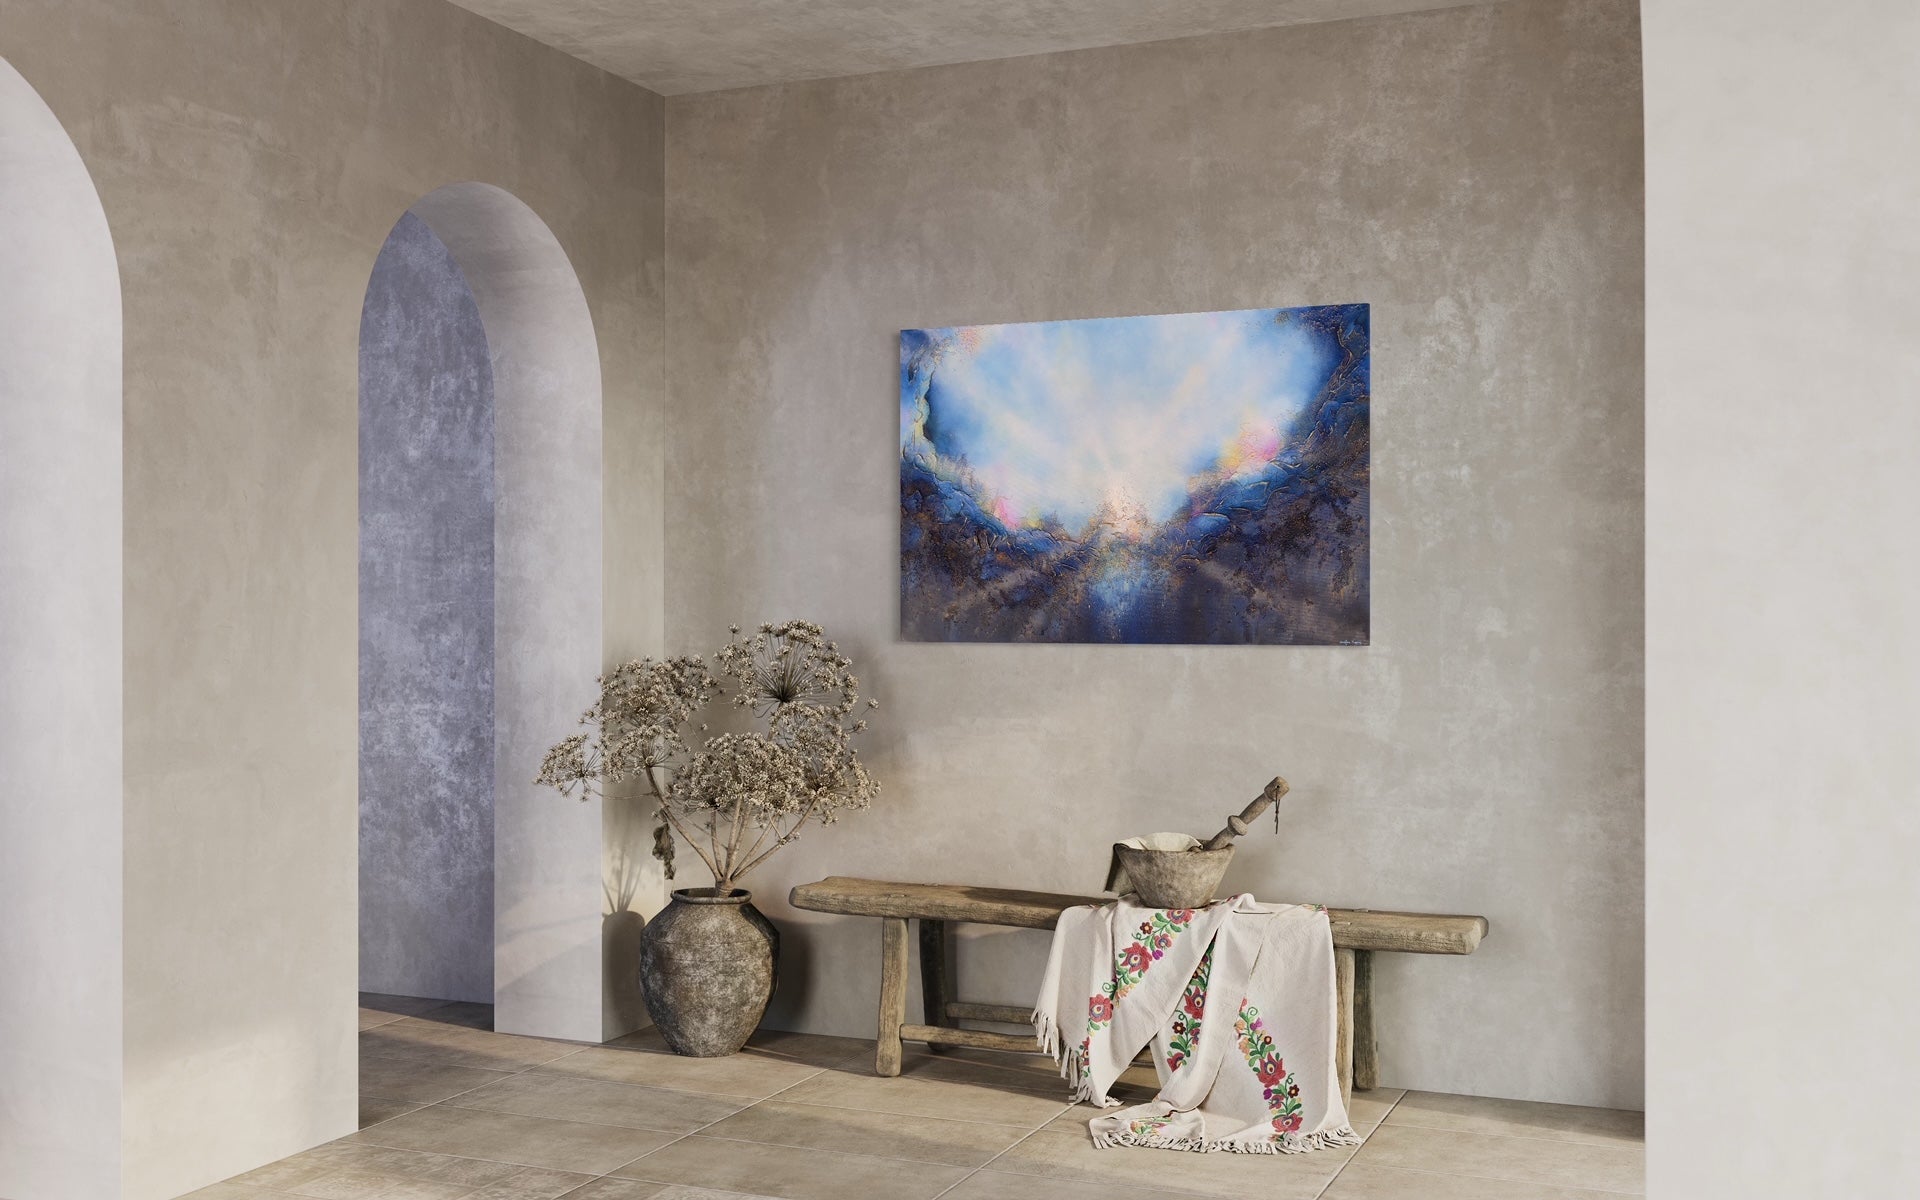 Soul's Return, hanging over a rustic wood bench with dried plants, in an entry with rounded doorways and stone walls. a textured painting with light rays shining out from the center representing the soul's return to one's self, or the universe. Blue, pink, white, dark blue, textured painting. Ephemeral art, art with meaning, soul artist. Jennifer Tepper Fine Art.